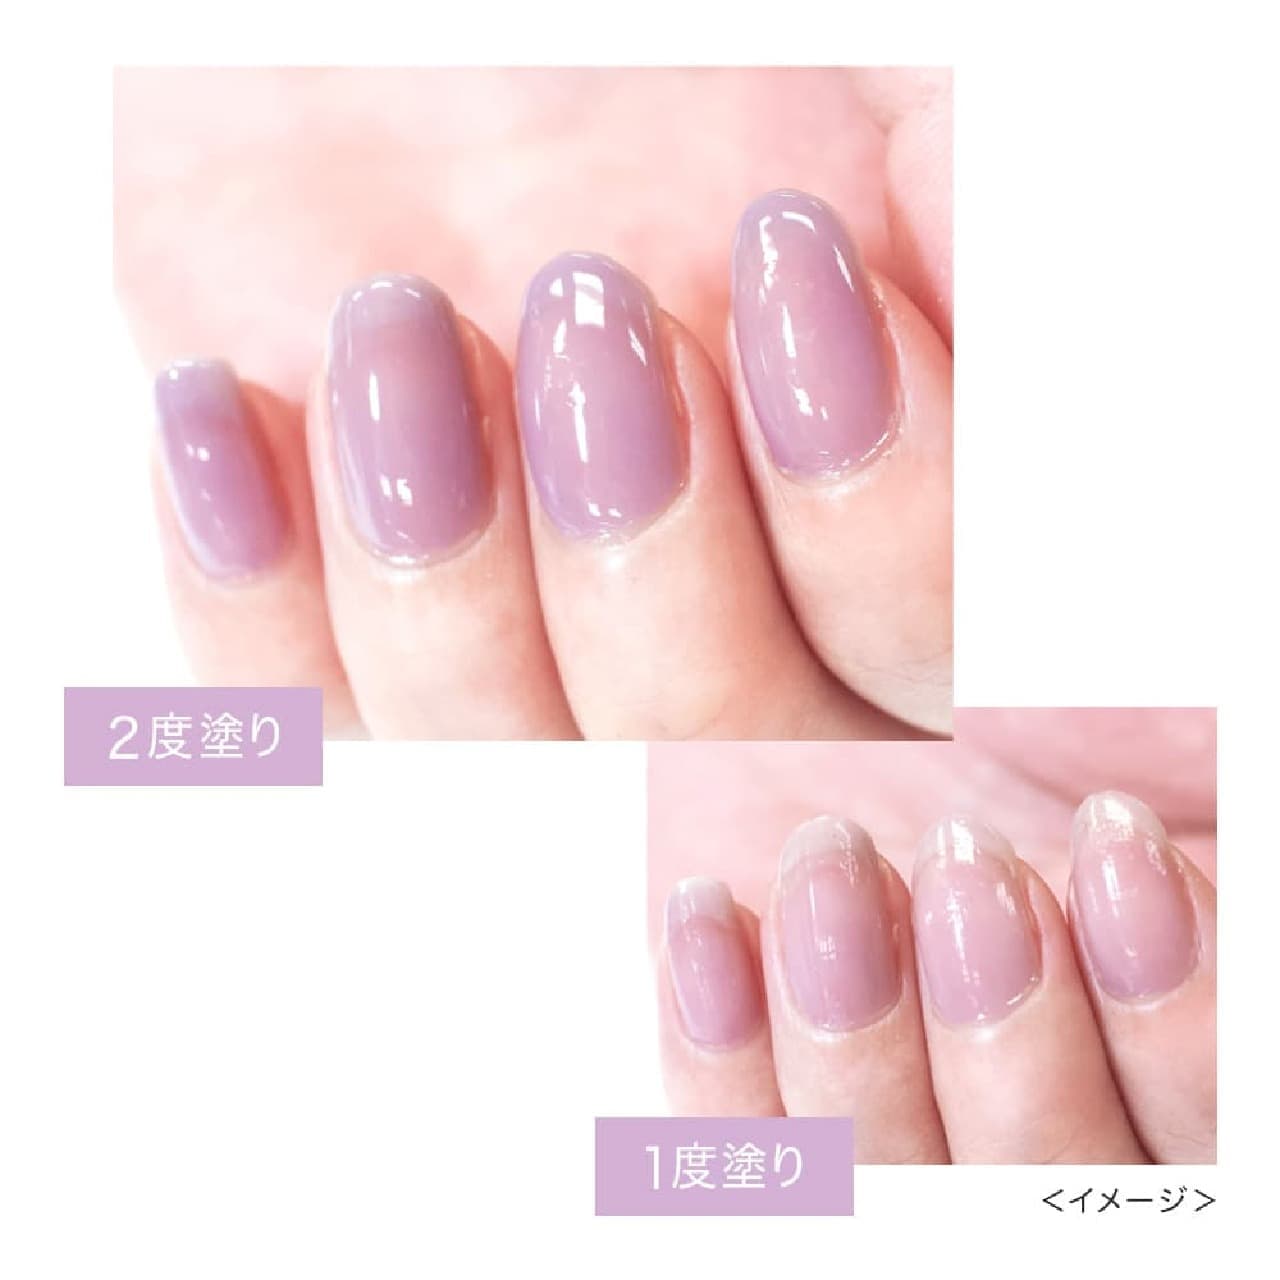 Sugar Doll All-in-One Nail Polish New Color "31 Clear Lavender